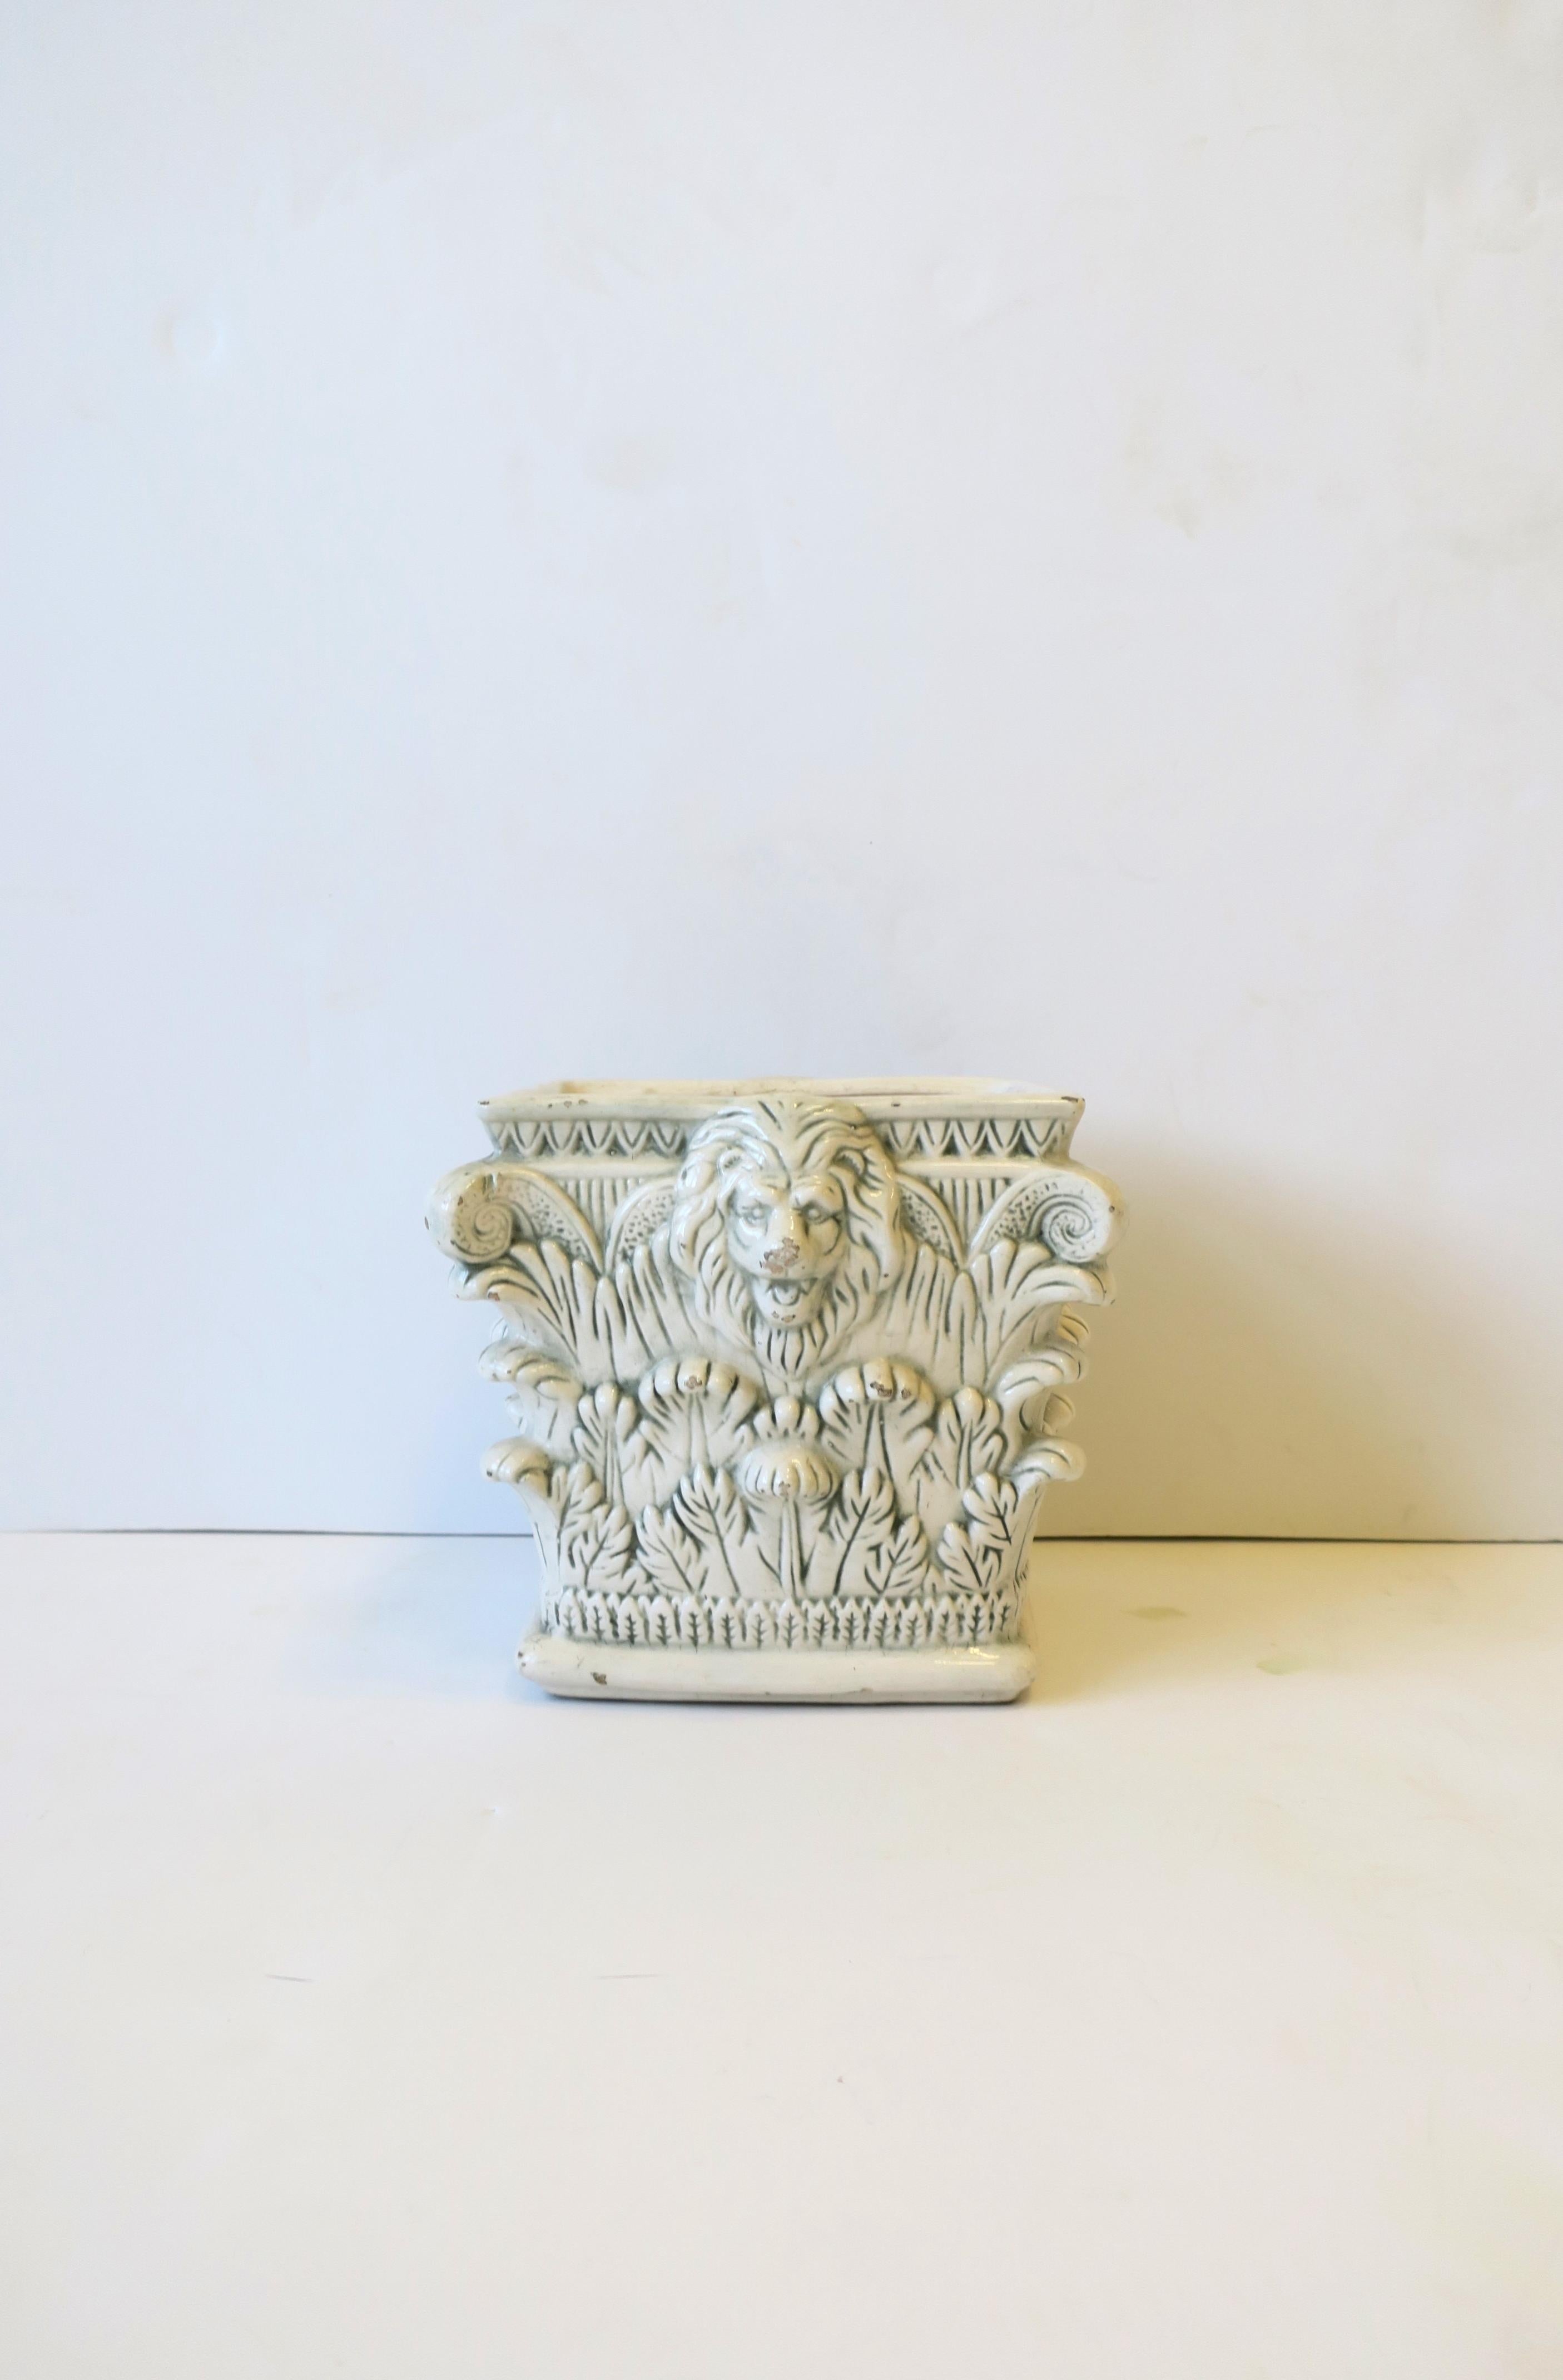 An Italian ceramic cachepot plant or flower-pot holder with lion-head design in Regency style, circa mid-20th century, Italy. Cachepot has a pillar-like design with lion head and acanthus leaf detail. Dimensions: 5.38